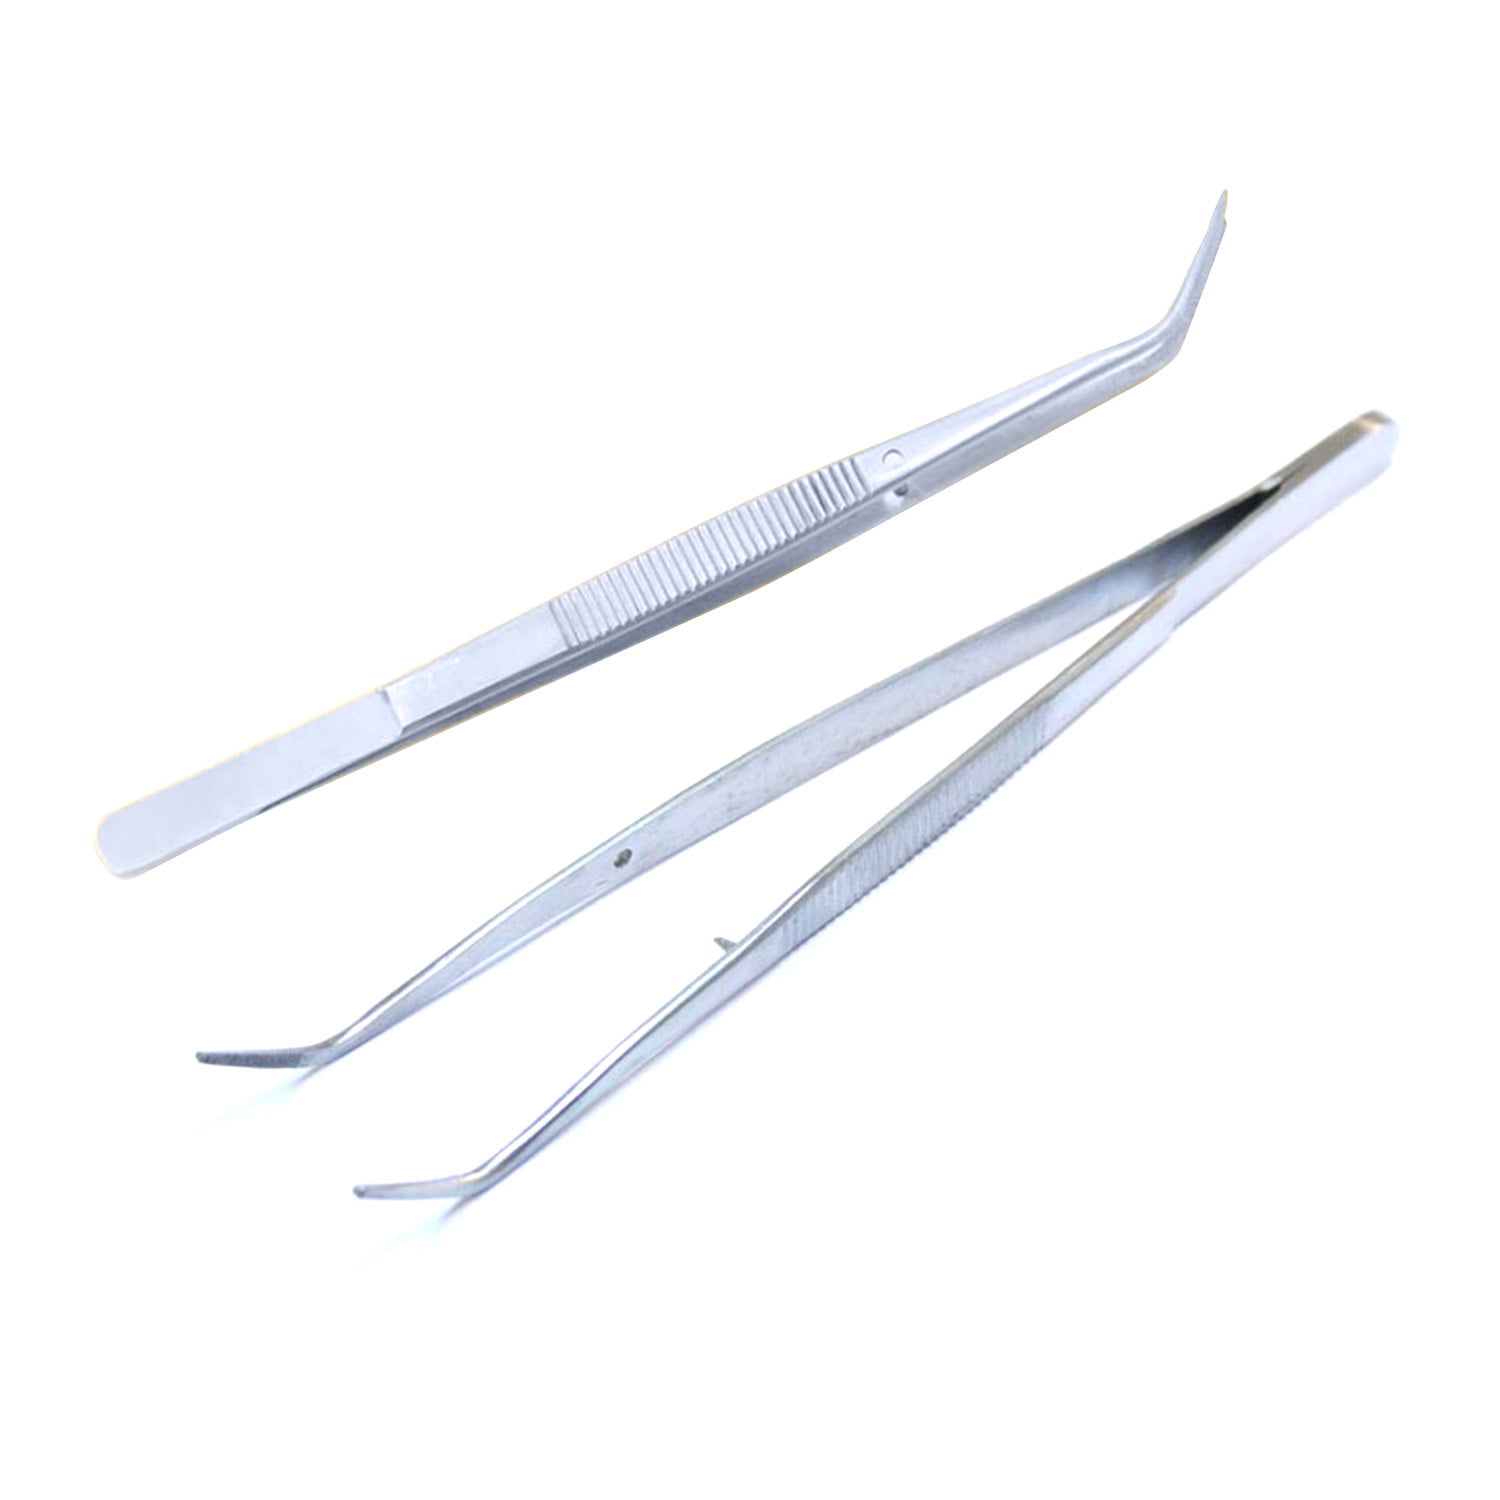 Tooltron Serger Tweezers with Serrated Tips